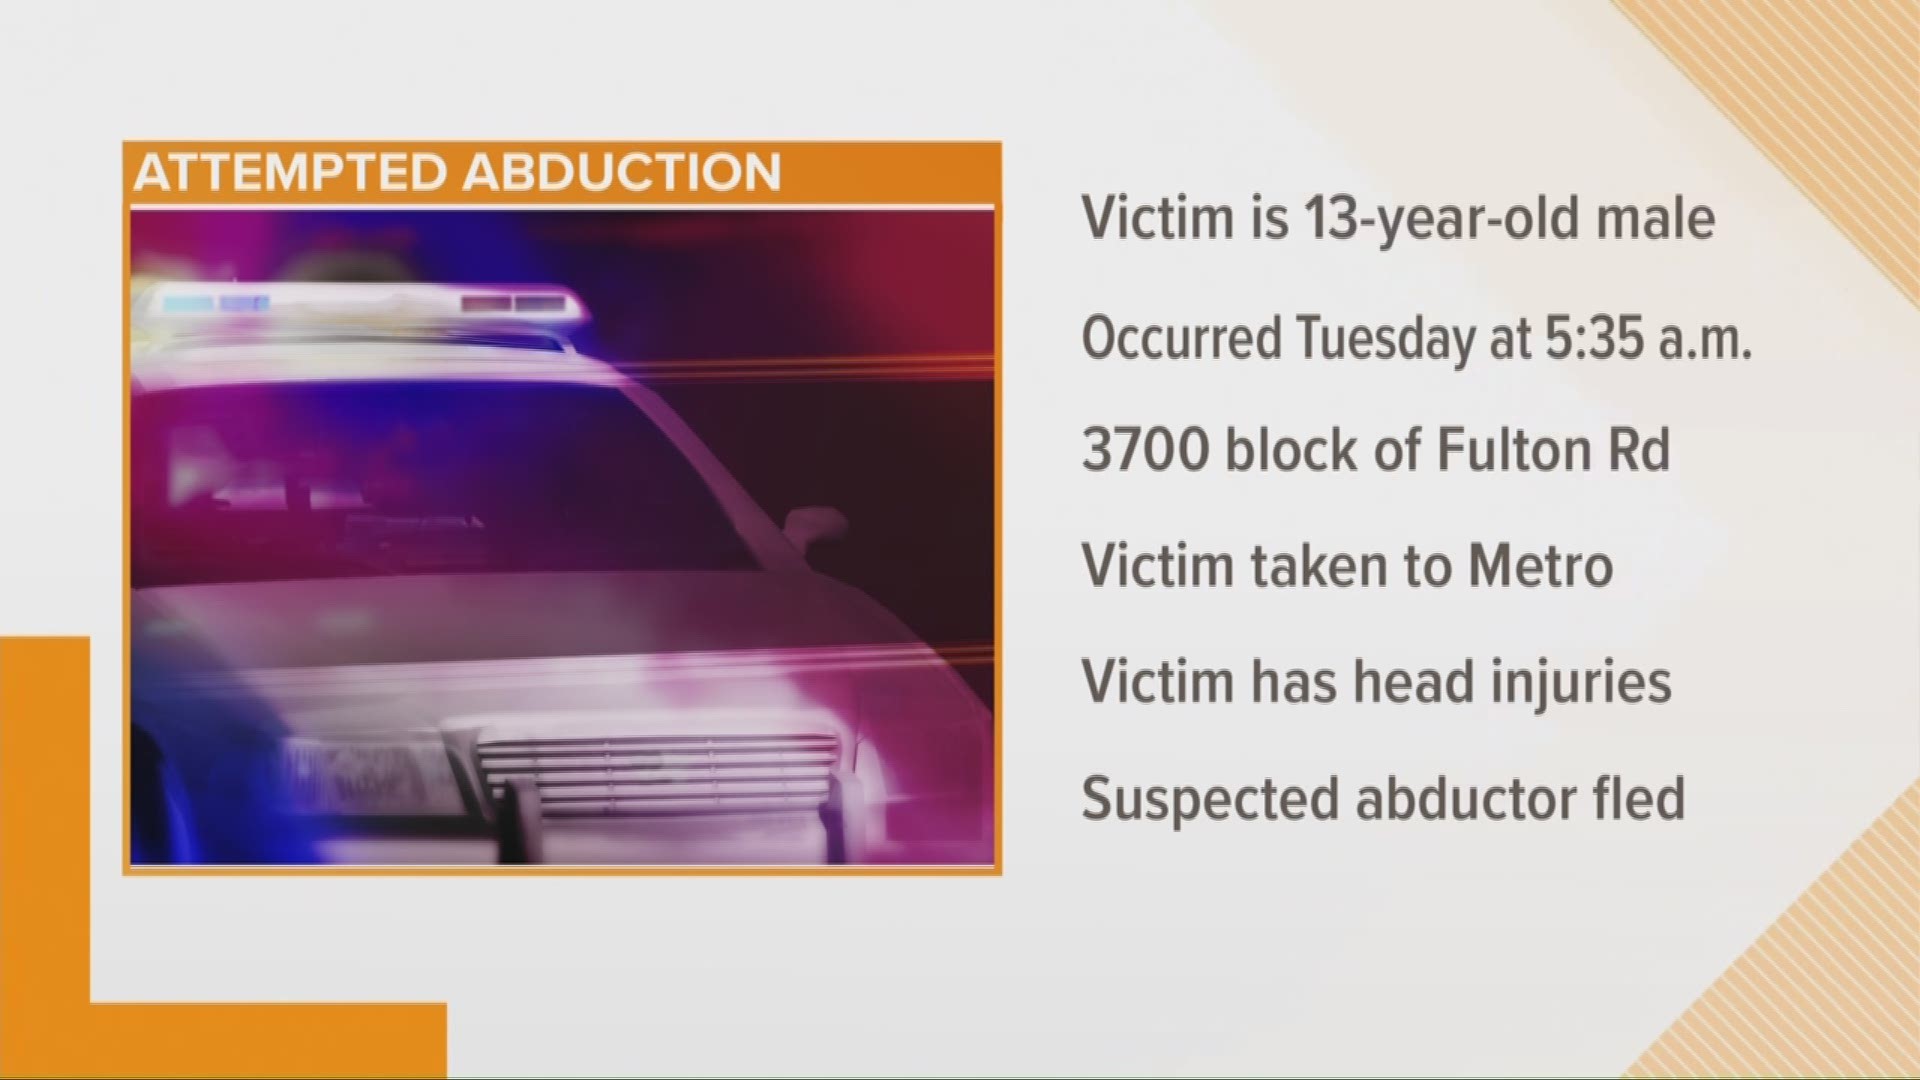 May 15, 2018: Police are investigating after the attempted abduction of a 13-year-old boy in the 3700 block of Fulton Road around 5:35 a.m. The boy was taken to the hospital with head lacerations. The suspects fled.